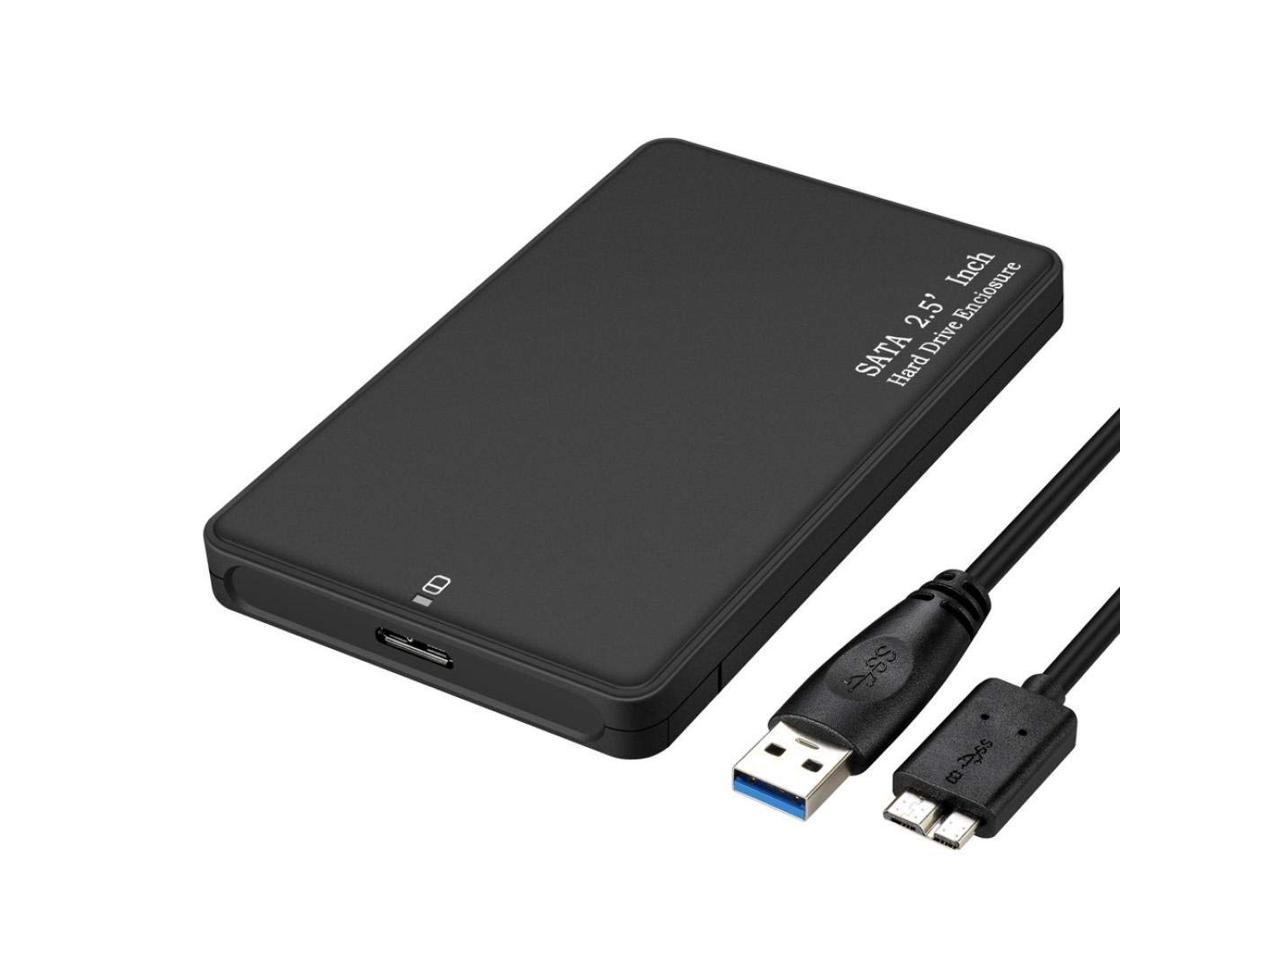 External Hard Drive Enclosure Adapter,USB 3.0 to SATA Hard Disk Case Housing for 2.5 Inch 9.5mm HDD/SSD, Up to 10TB,Tool Free UASP, For Sandisk, WD, Seagate, Toshiba, Samsung, Hitachi.... - Newegg.com